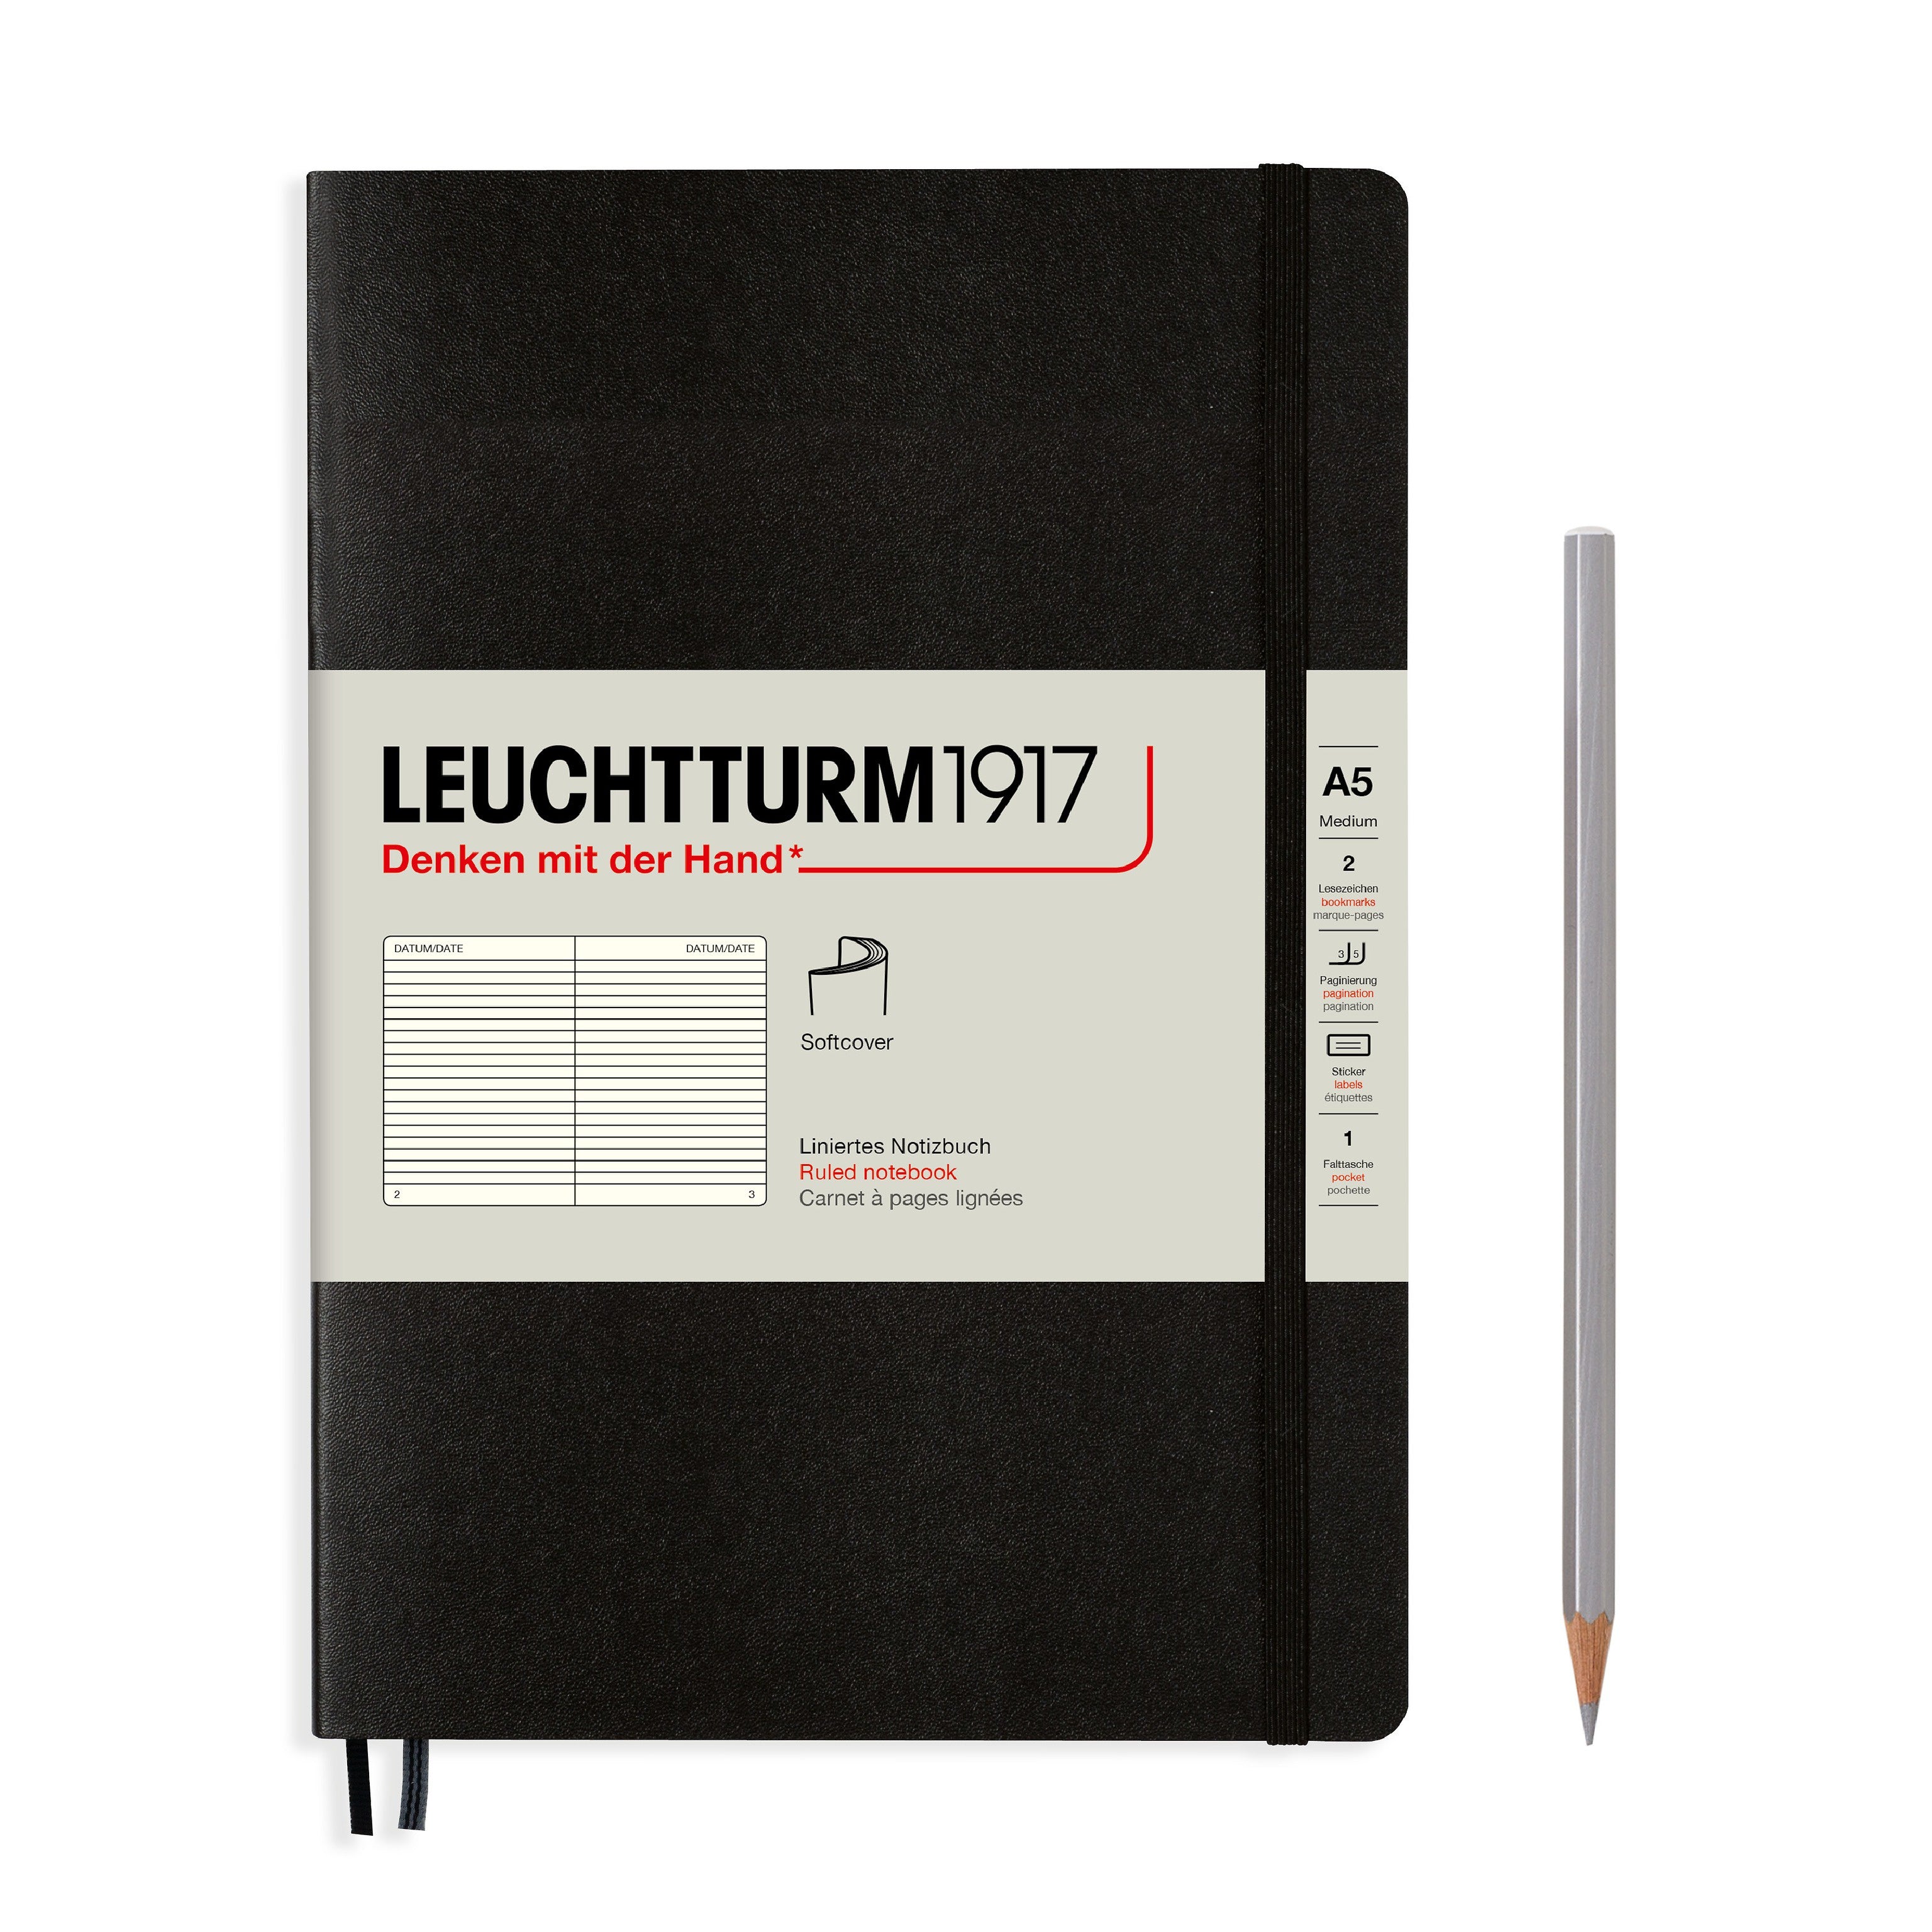 Leuchtturm1917 Notebook Softcover Medium (A5) Ruled Black - Pencraft the boutique